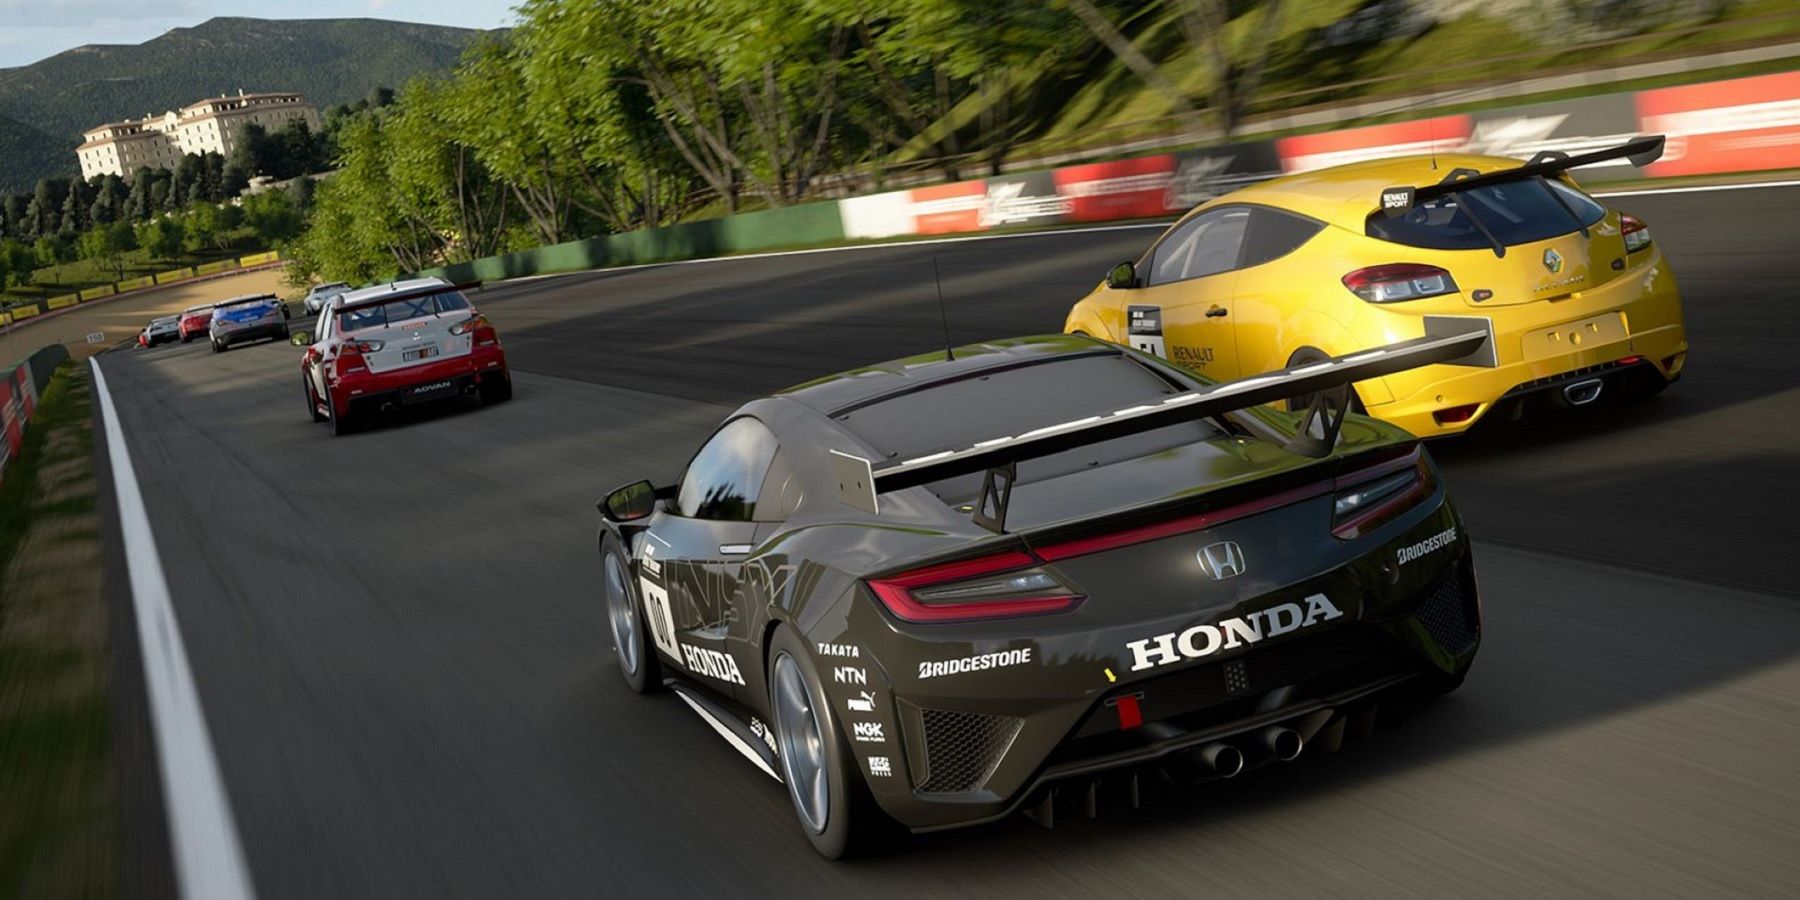 Gran Turismo 7 State of Play – All New Game Modes, Gameplay & PS5 Features  Announced by Gaming Intel. 2-Player Split Screen. : r/SplitScreenGaming